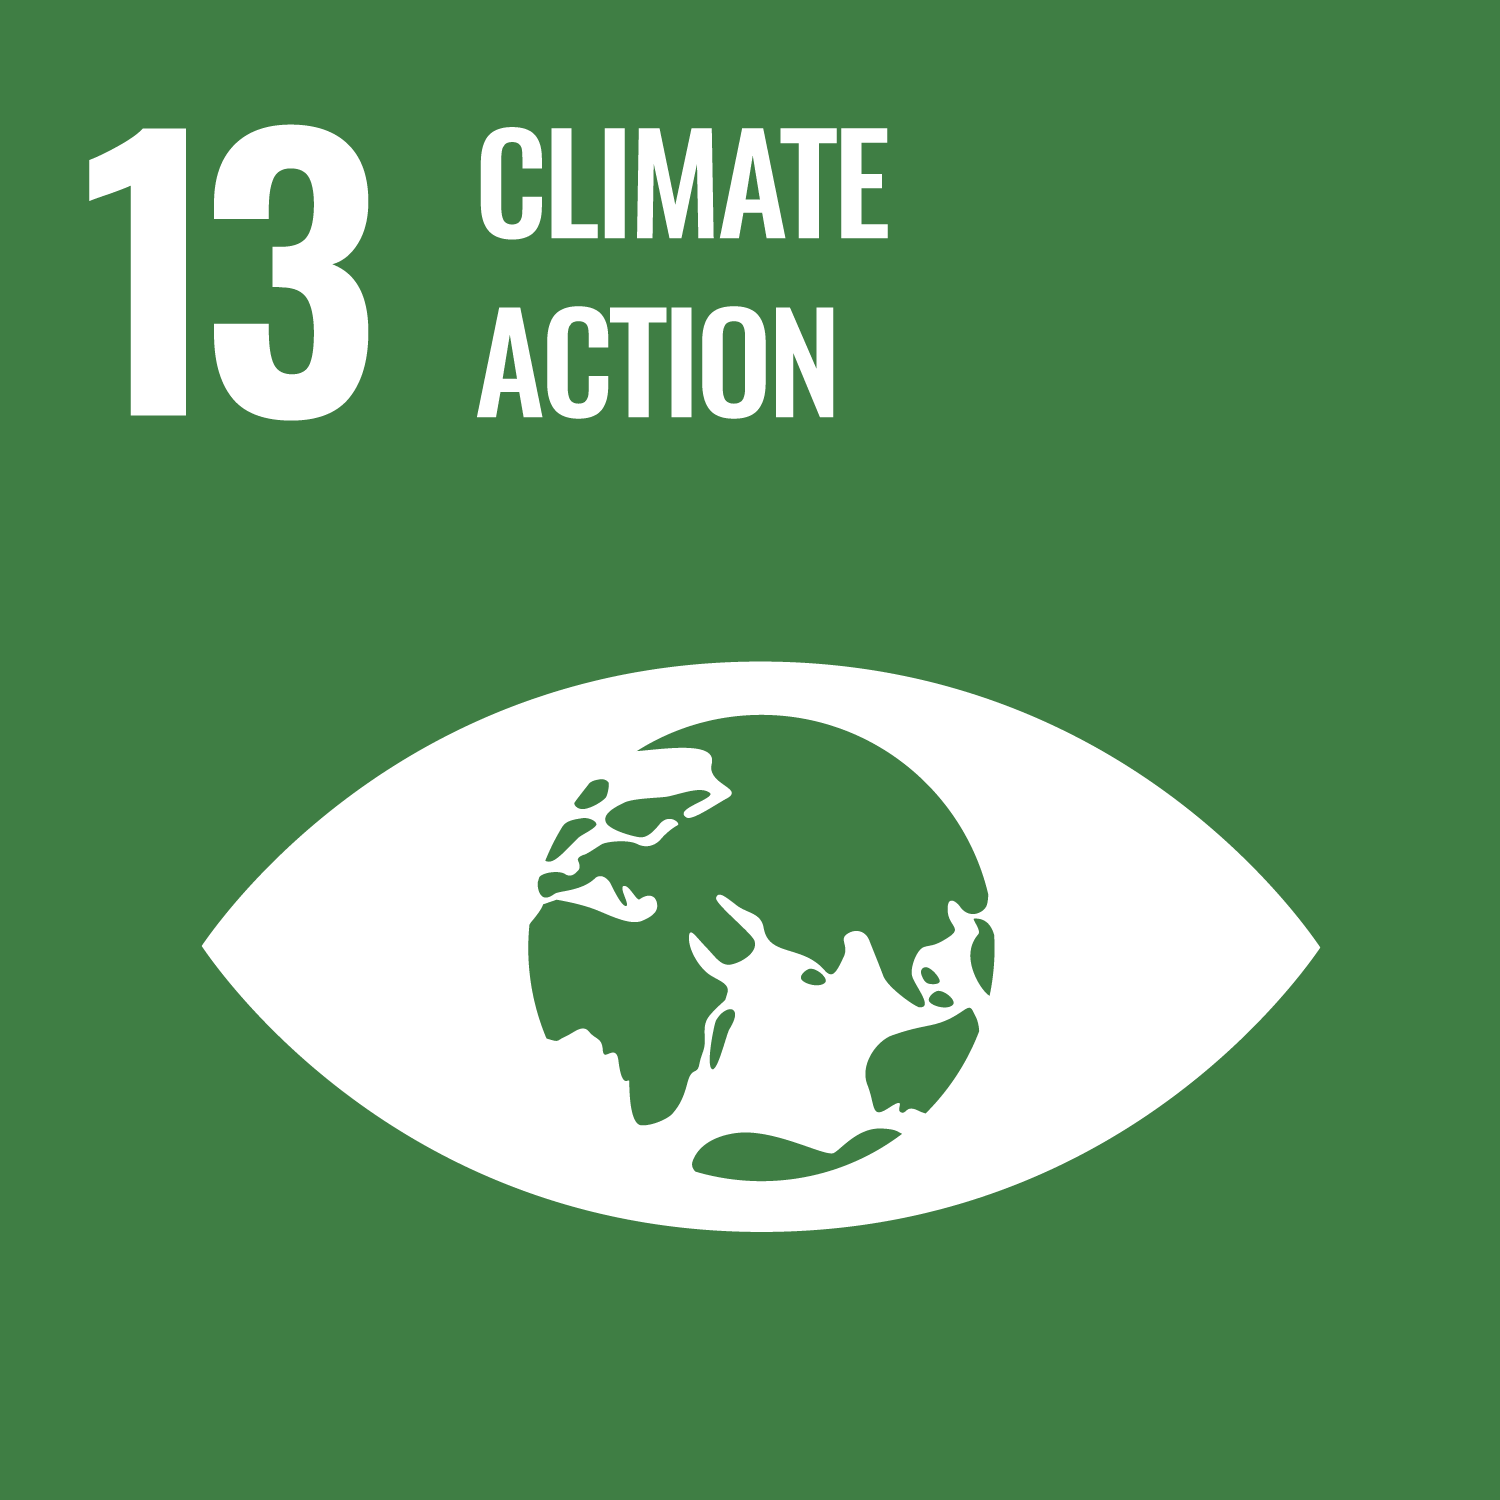 The official logo of the United Nations Sustainable Development Goal #13: Climate action.